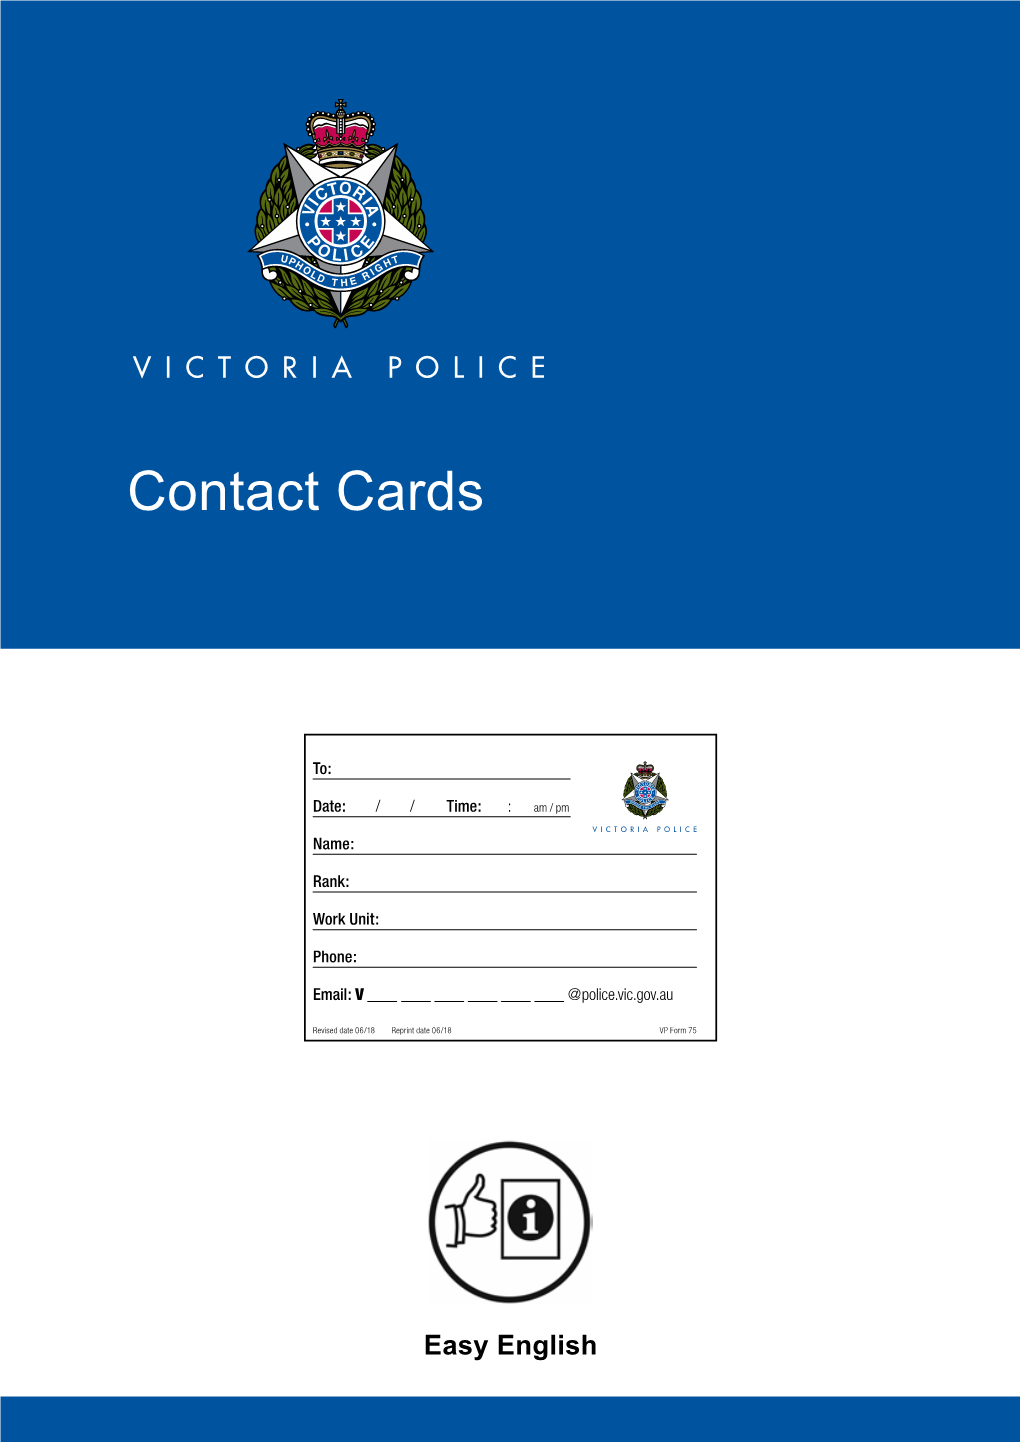 Victoria Police Contact Cards